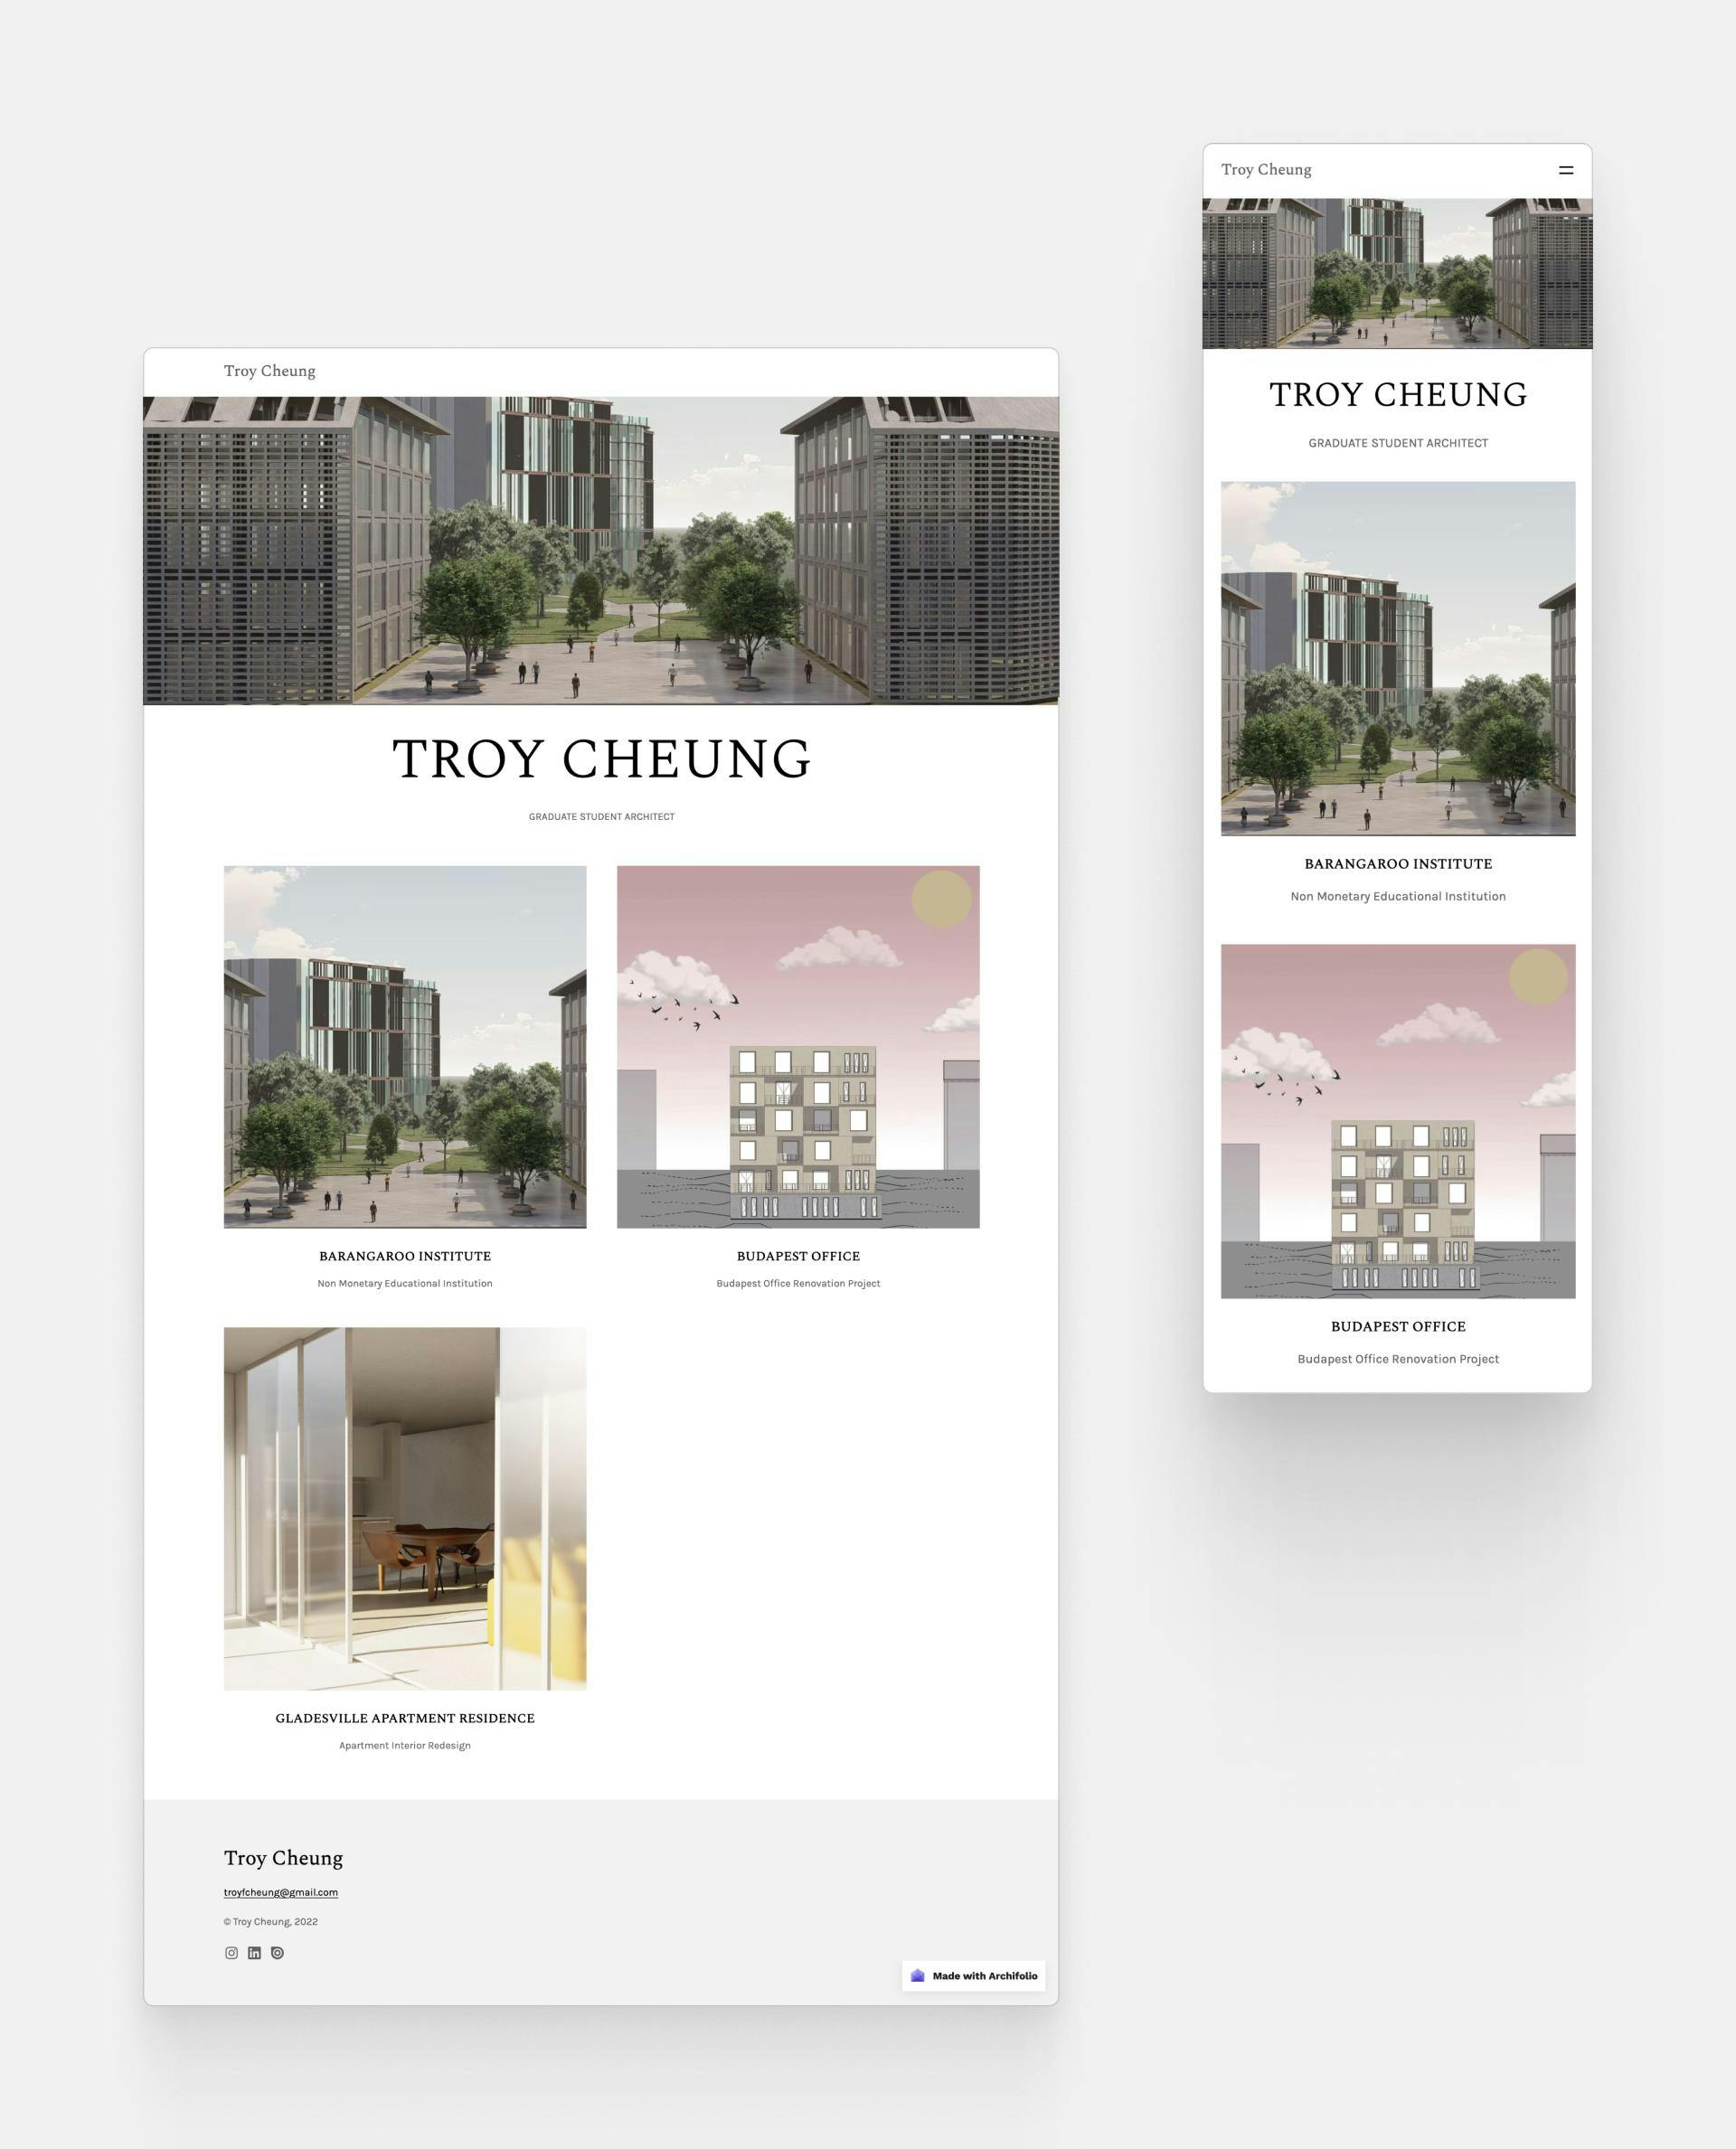 Troy Cheung created this site with Archifolio’s Agora template